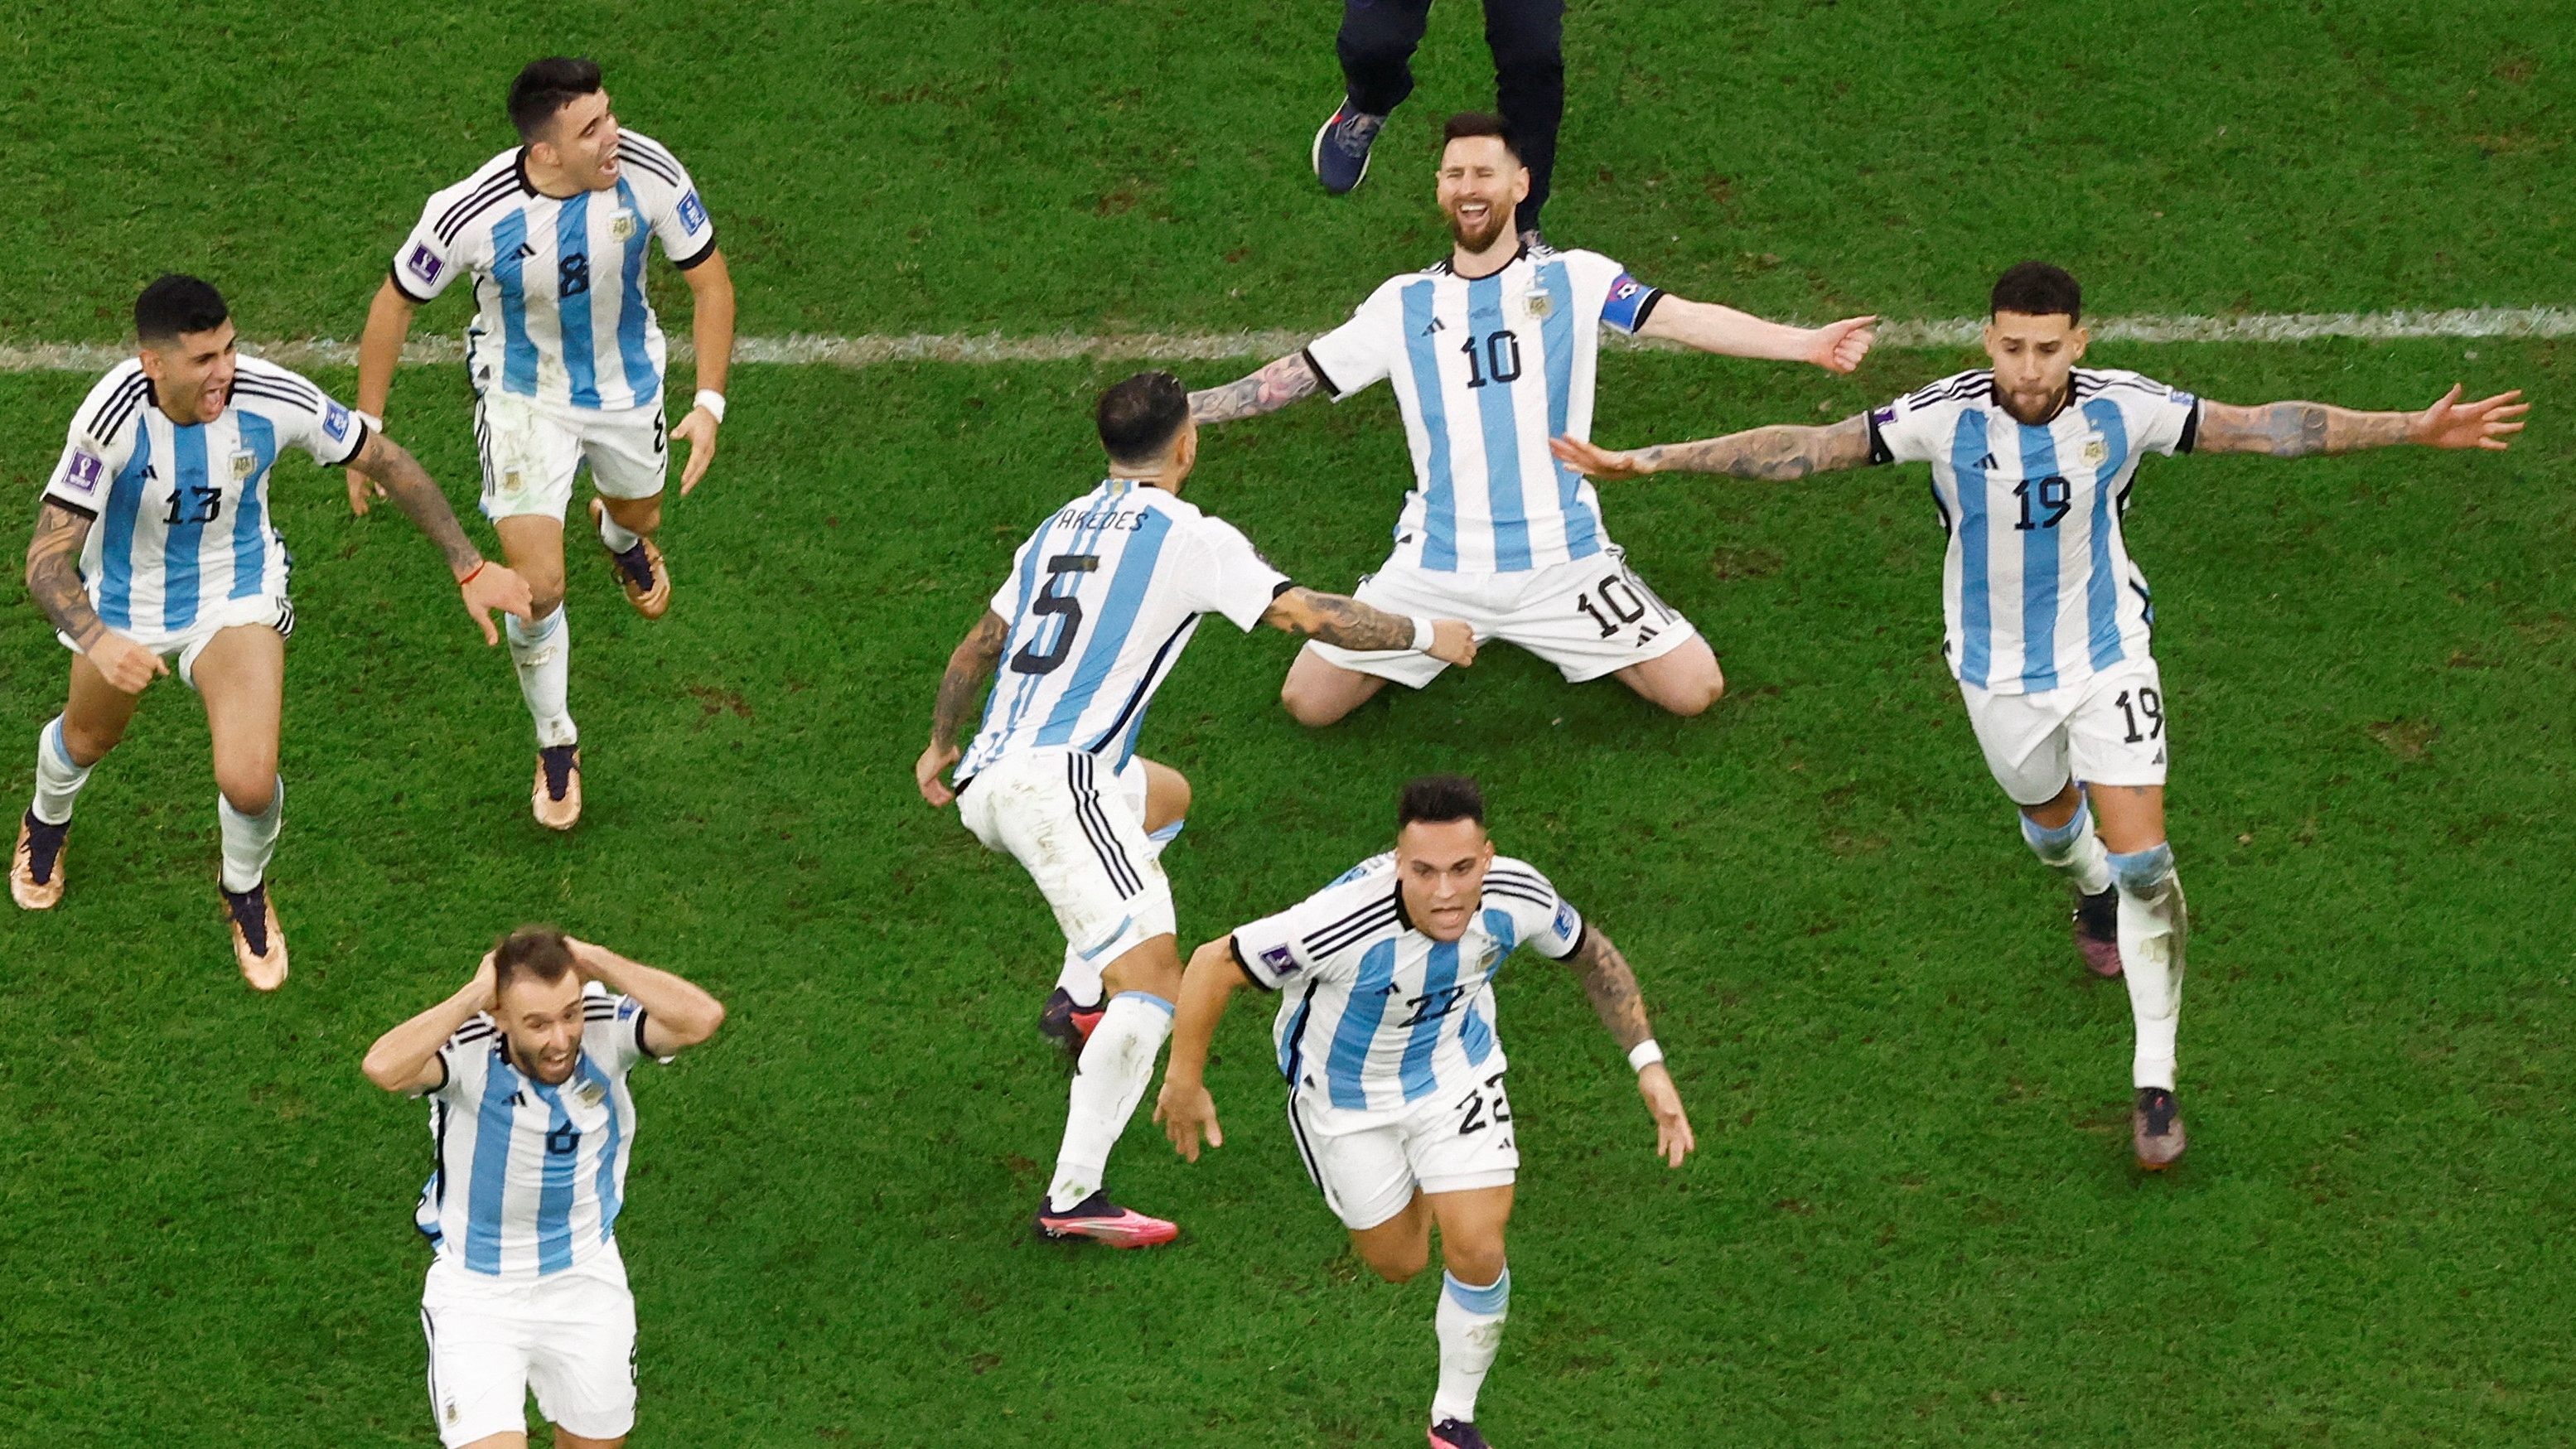 Soccer Football - FIFA World Cup Qatar 2022 - Final - Argentina v France - Lusail Stadium, Lusail, Qatar - December 18, 2022 Argentina's Lionel Messi and teammates celebrate winning the World Cup REUTERS/Peter Cziborra TPX IMAGES OF THE DAY